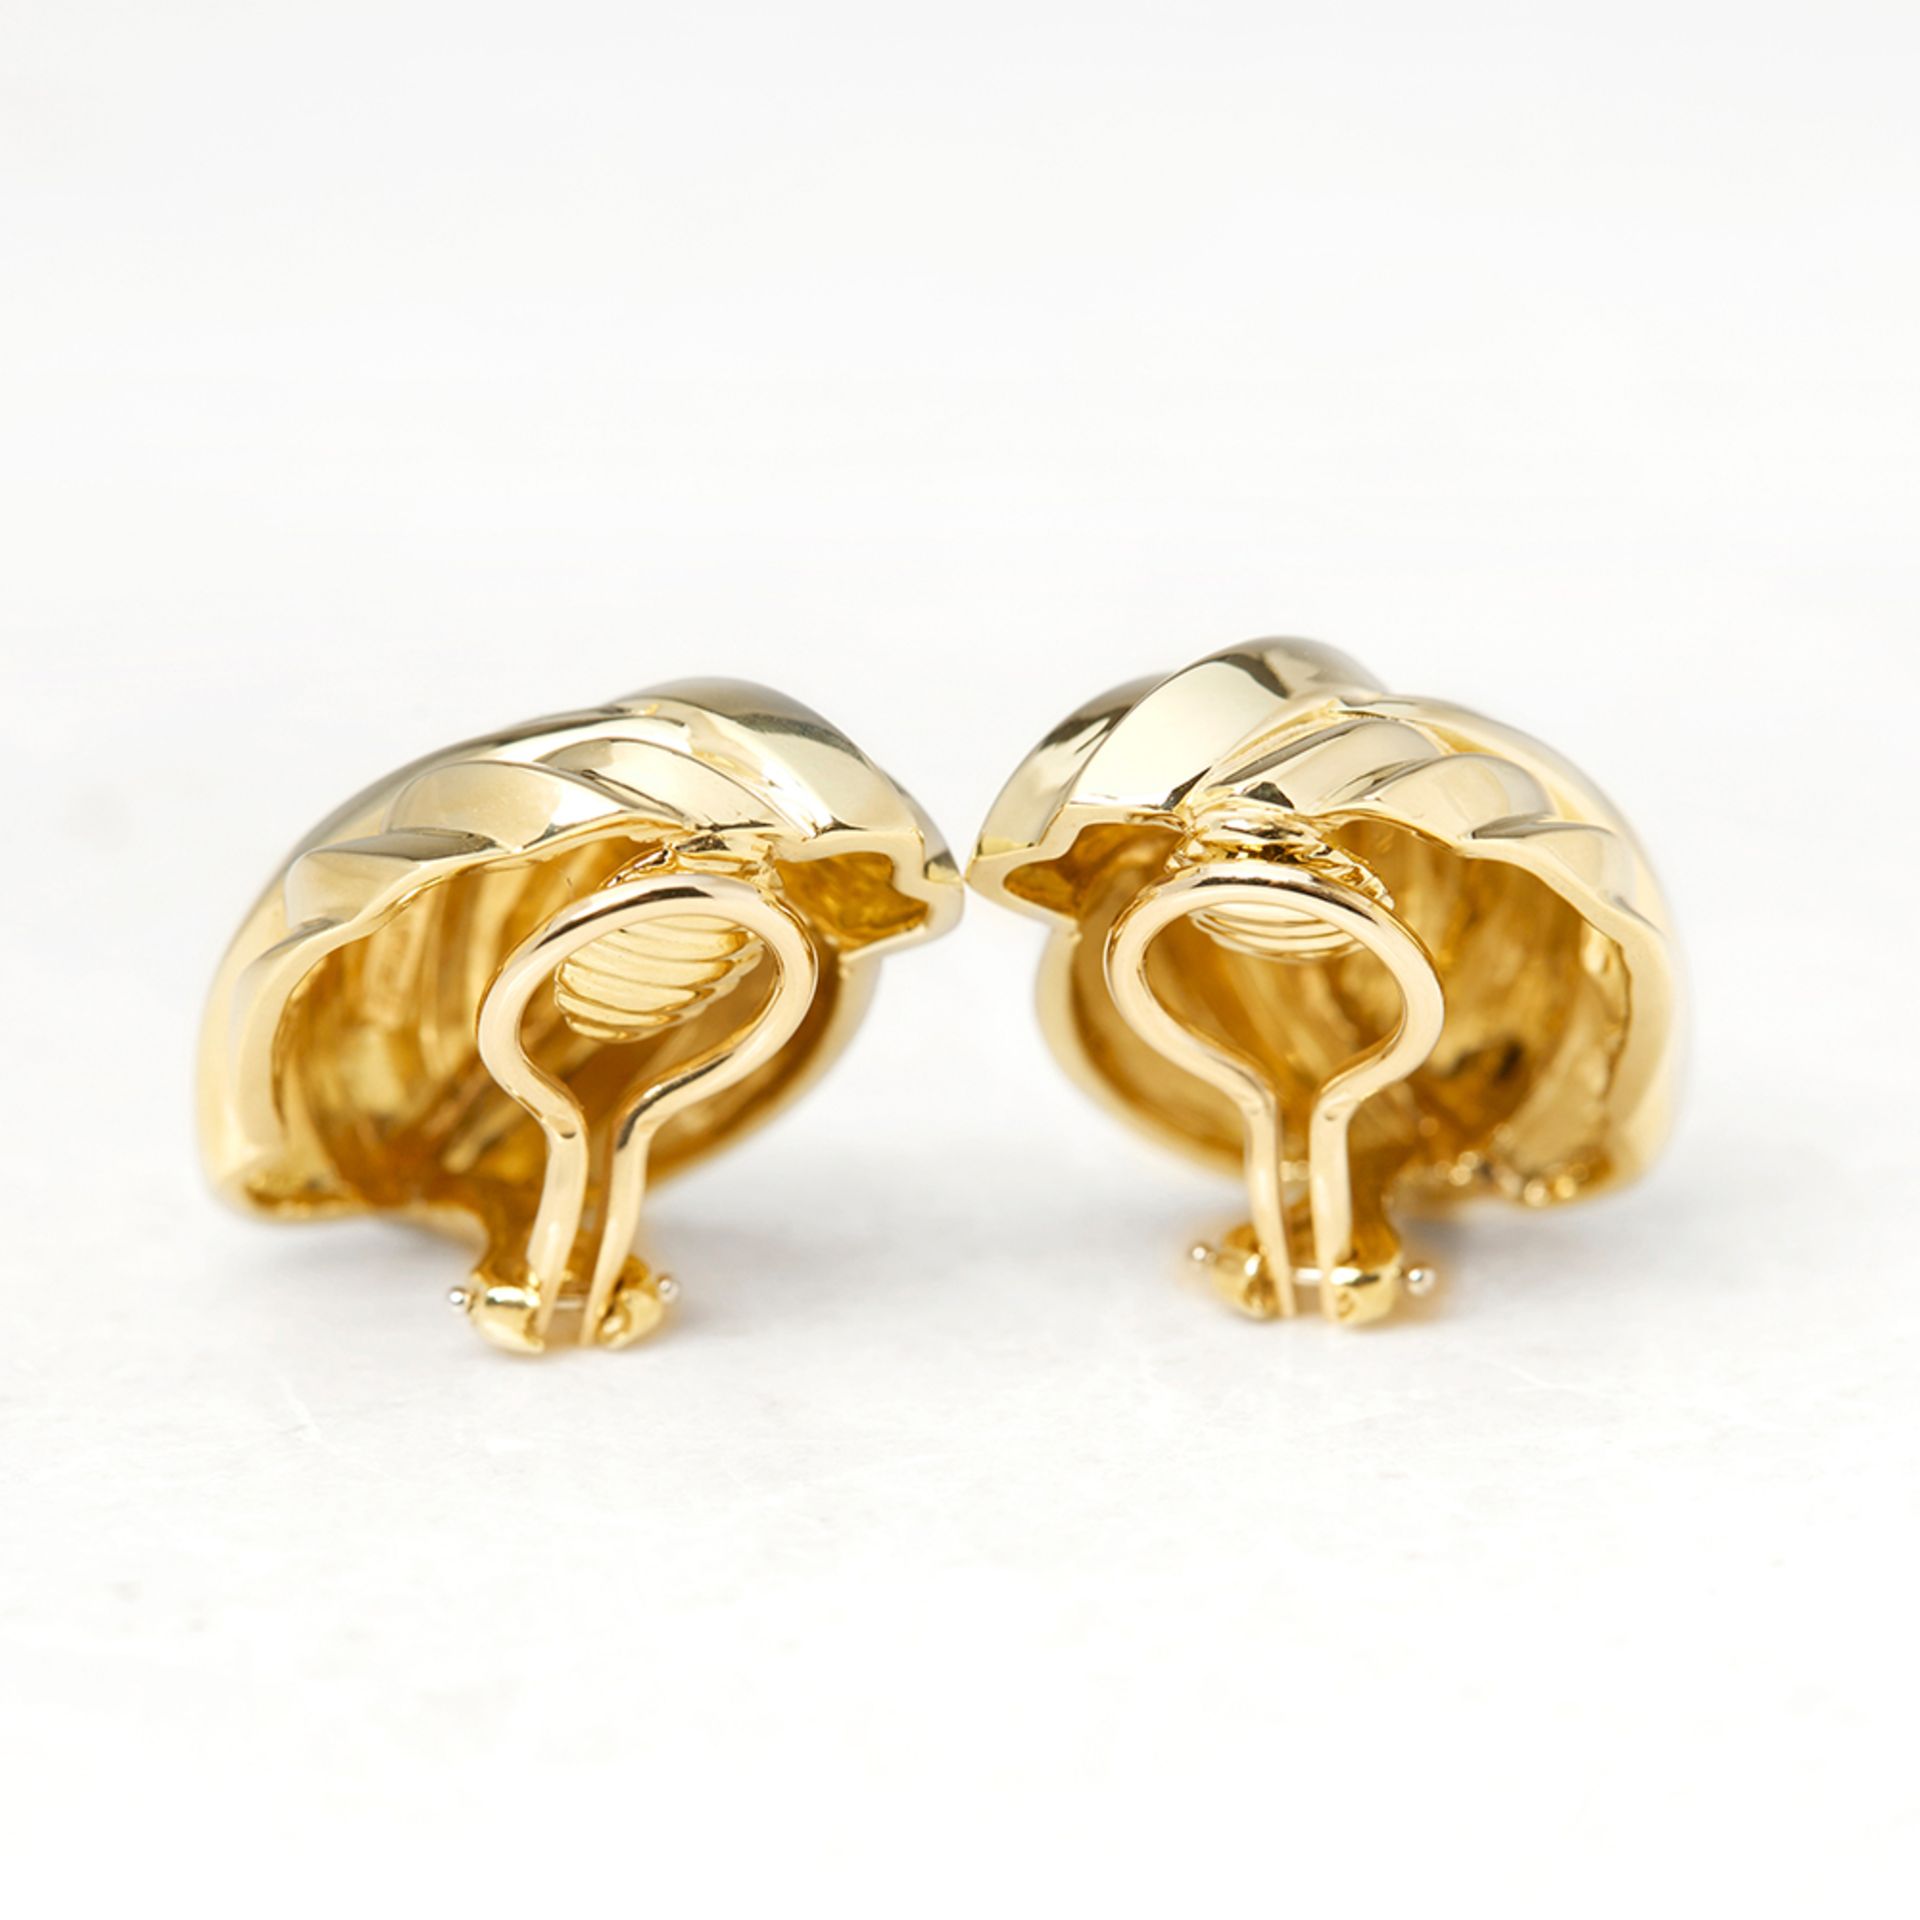 Tiffany & Co. 18k Yellow Gold Ear Clips - Image 3 of 7